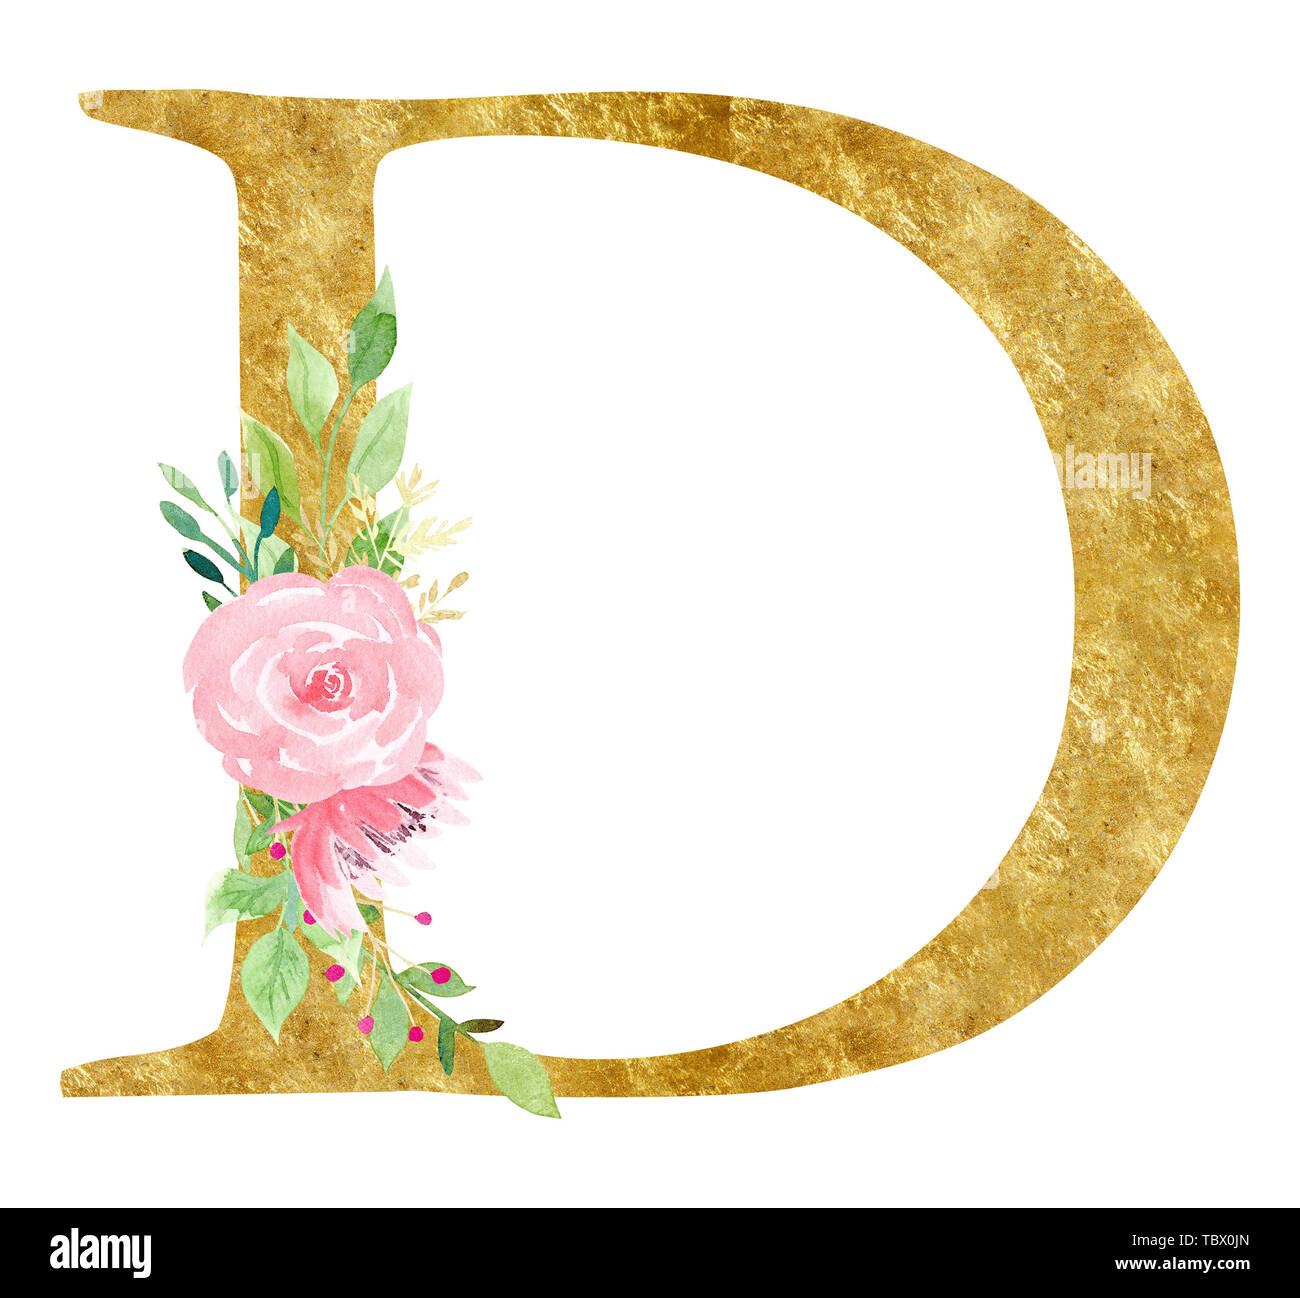 Initial D letter with blossom raster illustration. Latin alphabet symbol with pink flowers watercolor painting. Cardboard monogram with golden texture Stock Photo